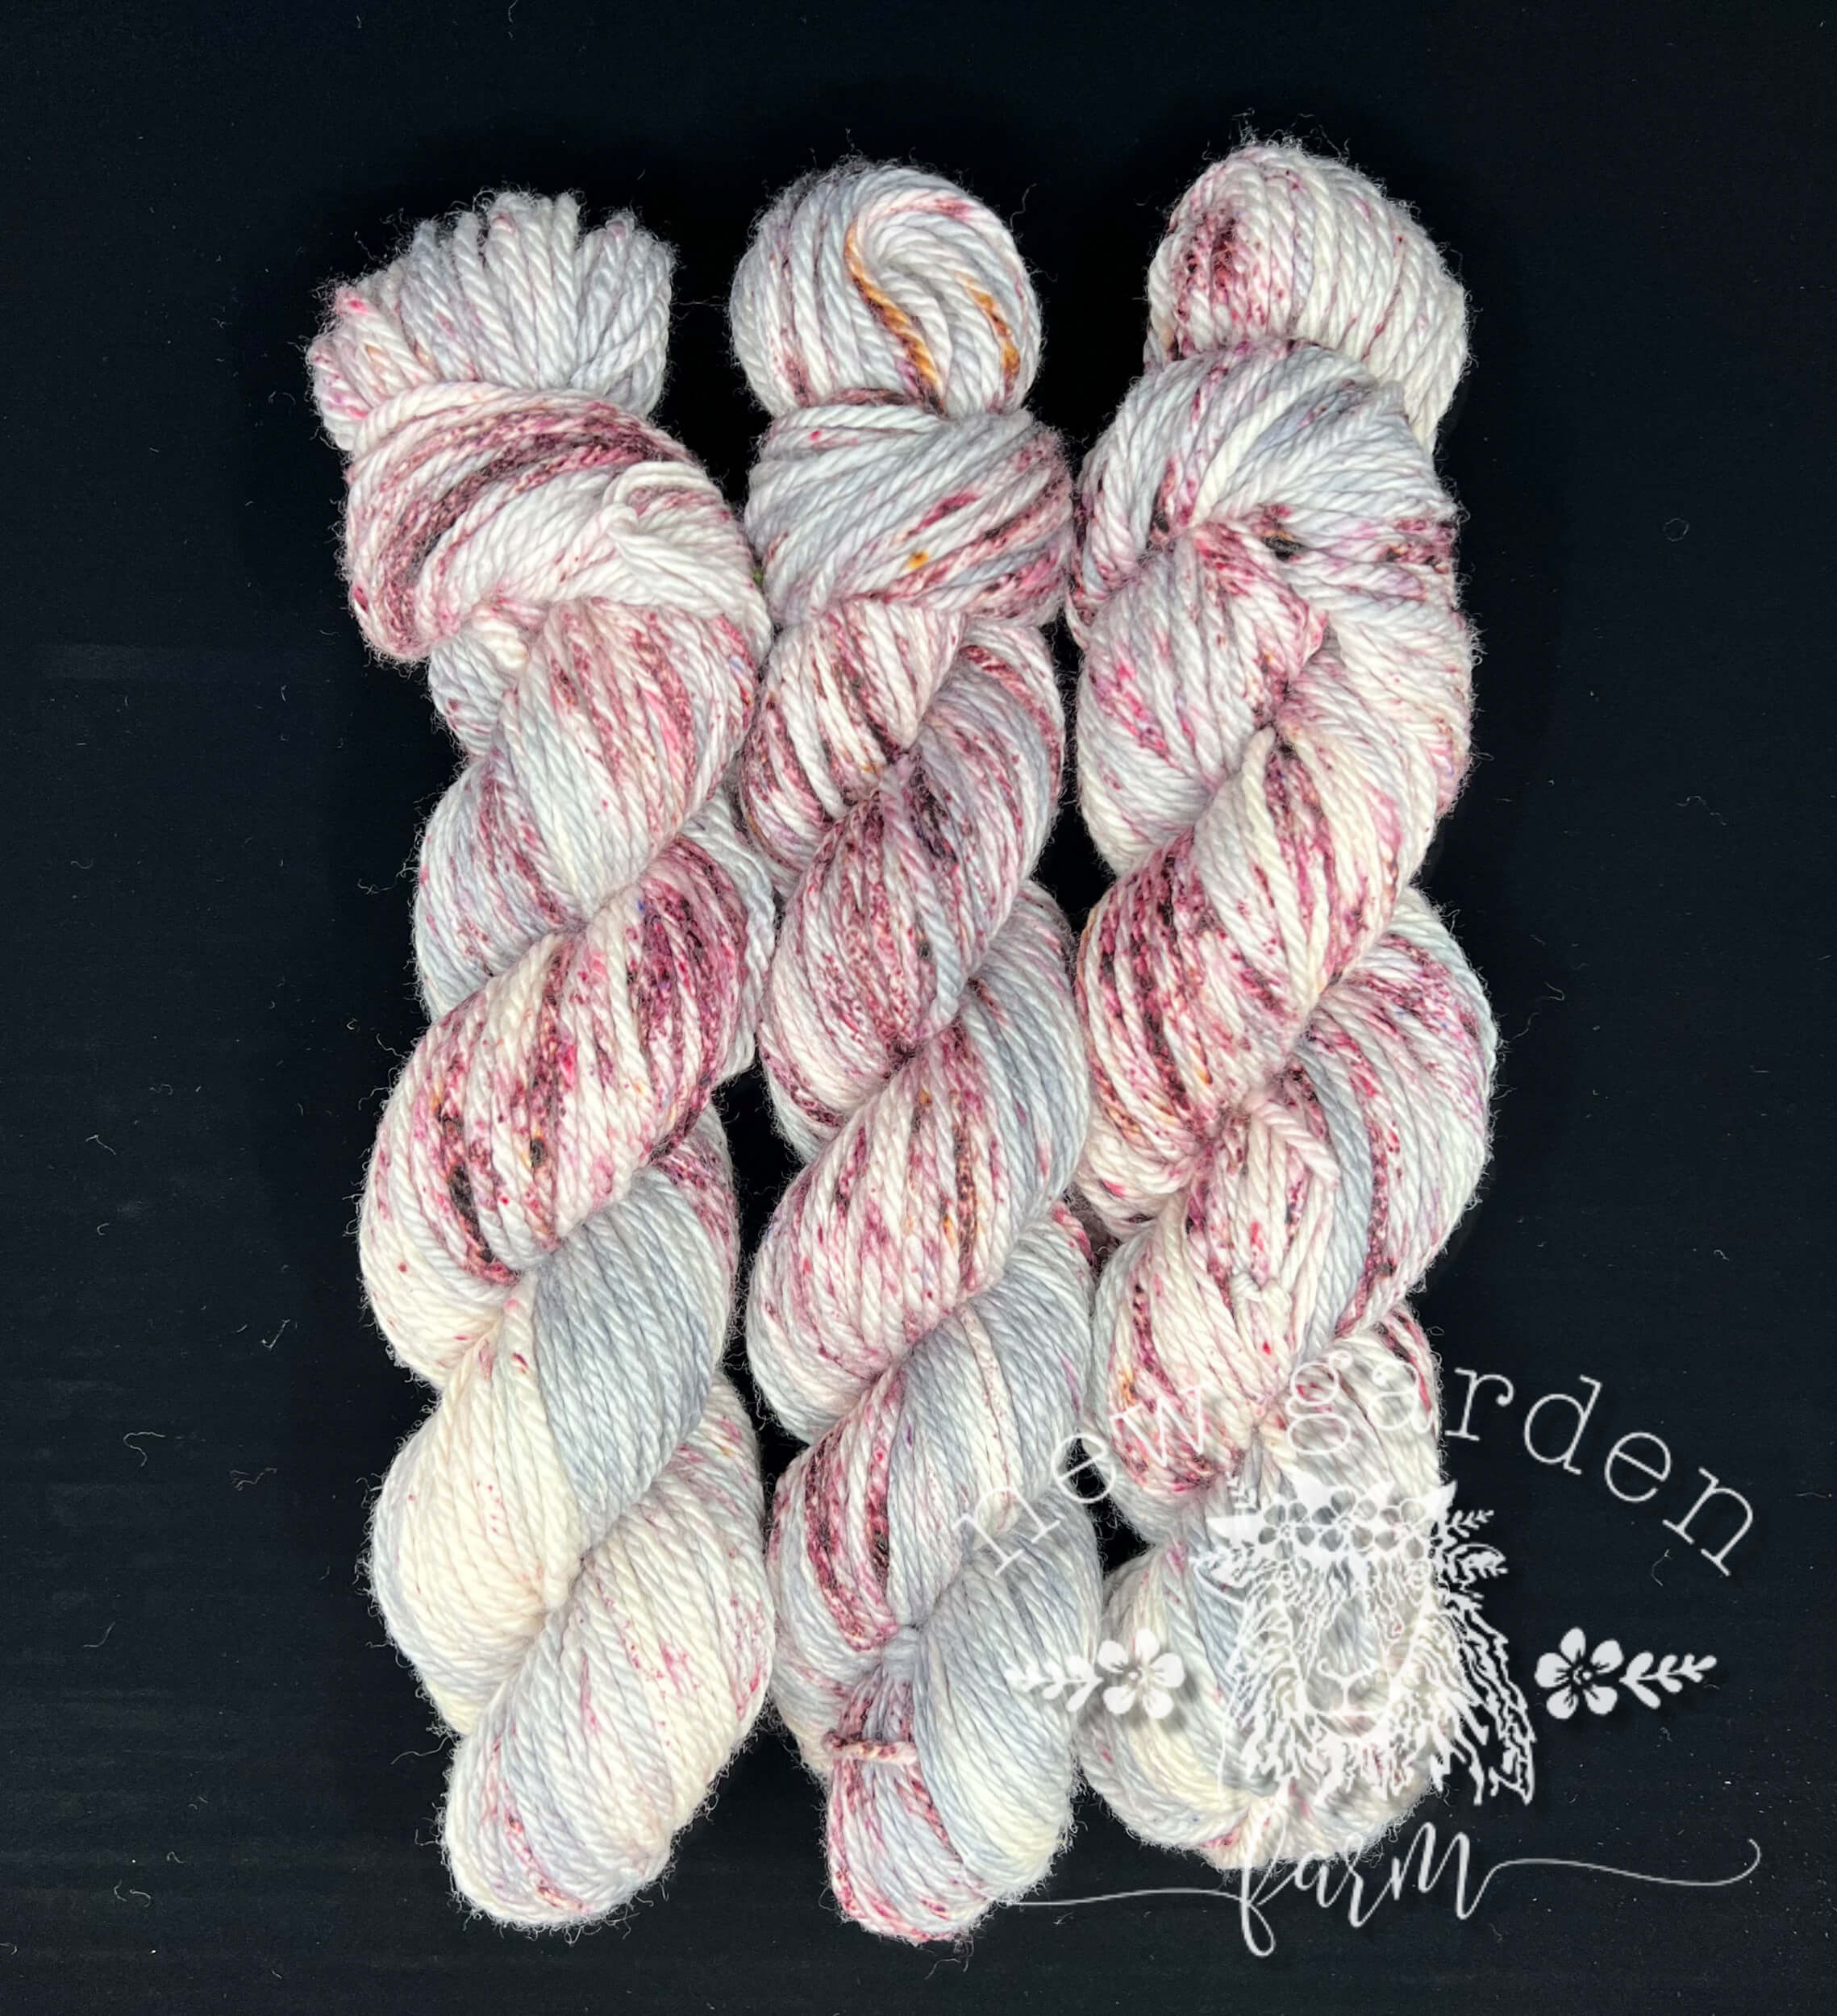 winter white, speckles of berry and grey hand dyed yarn